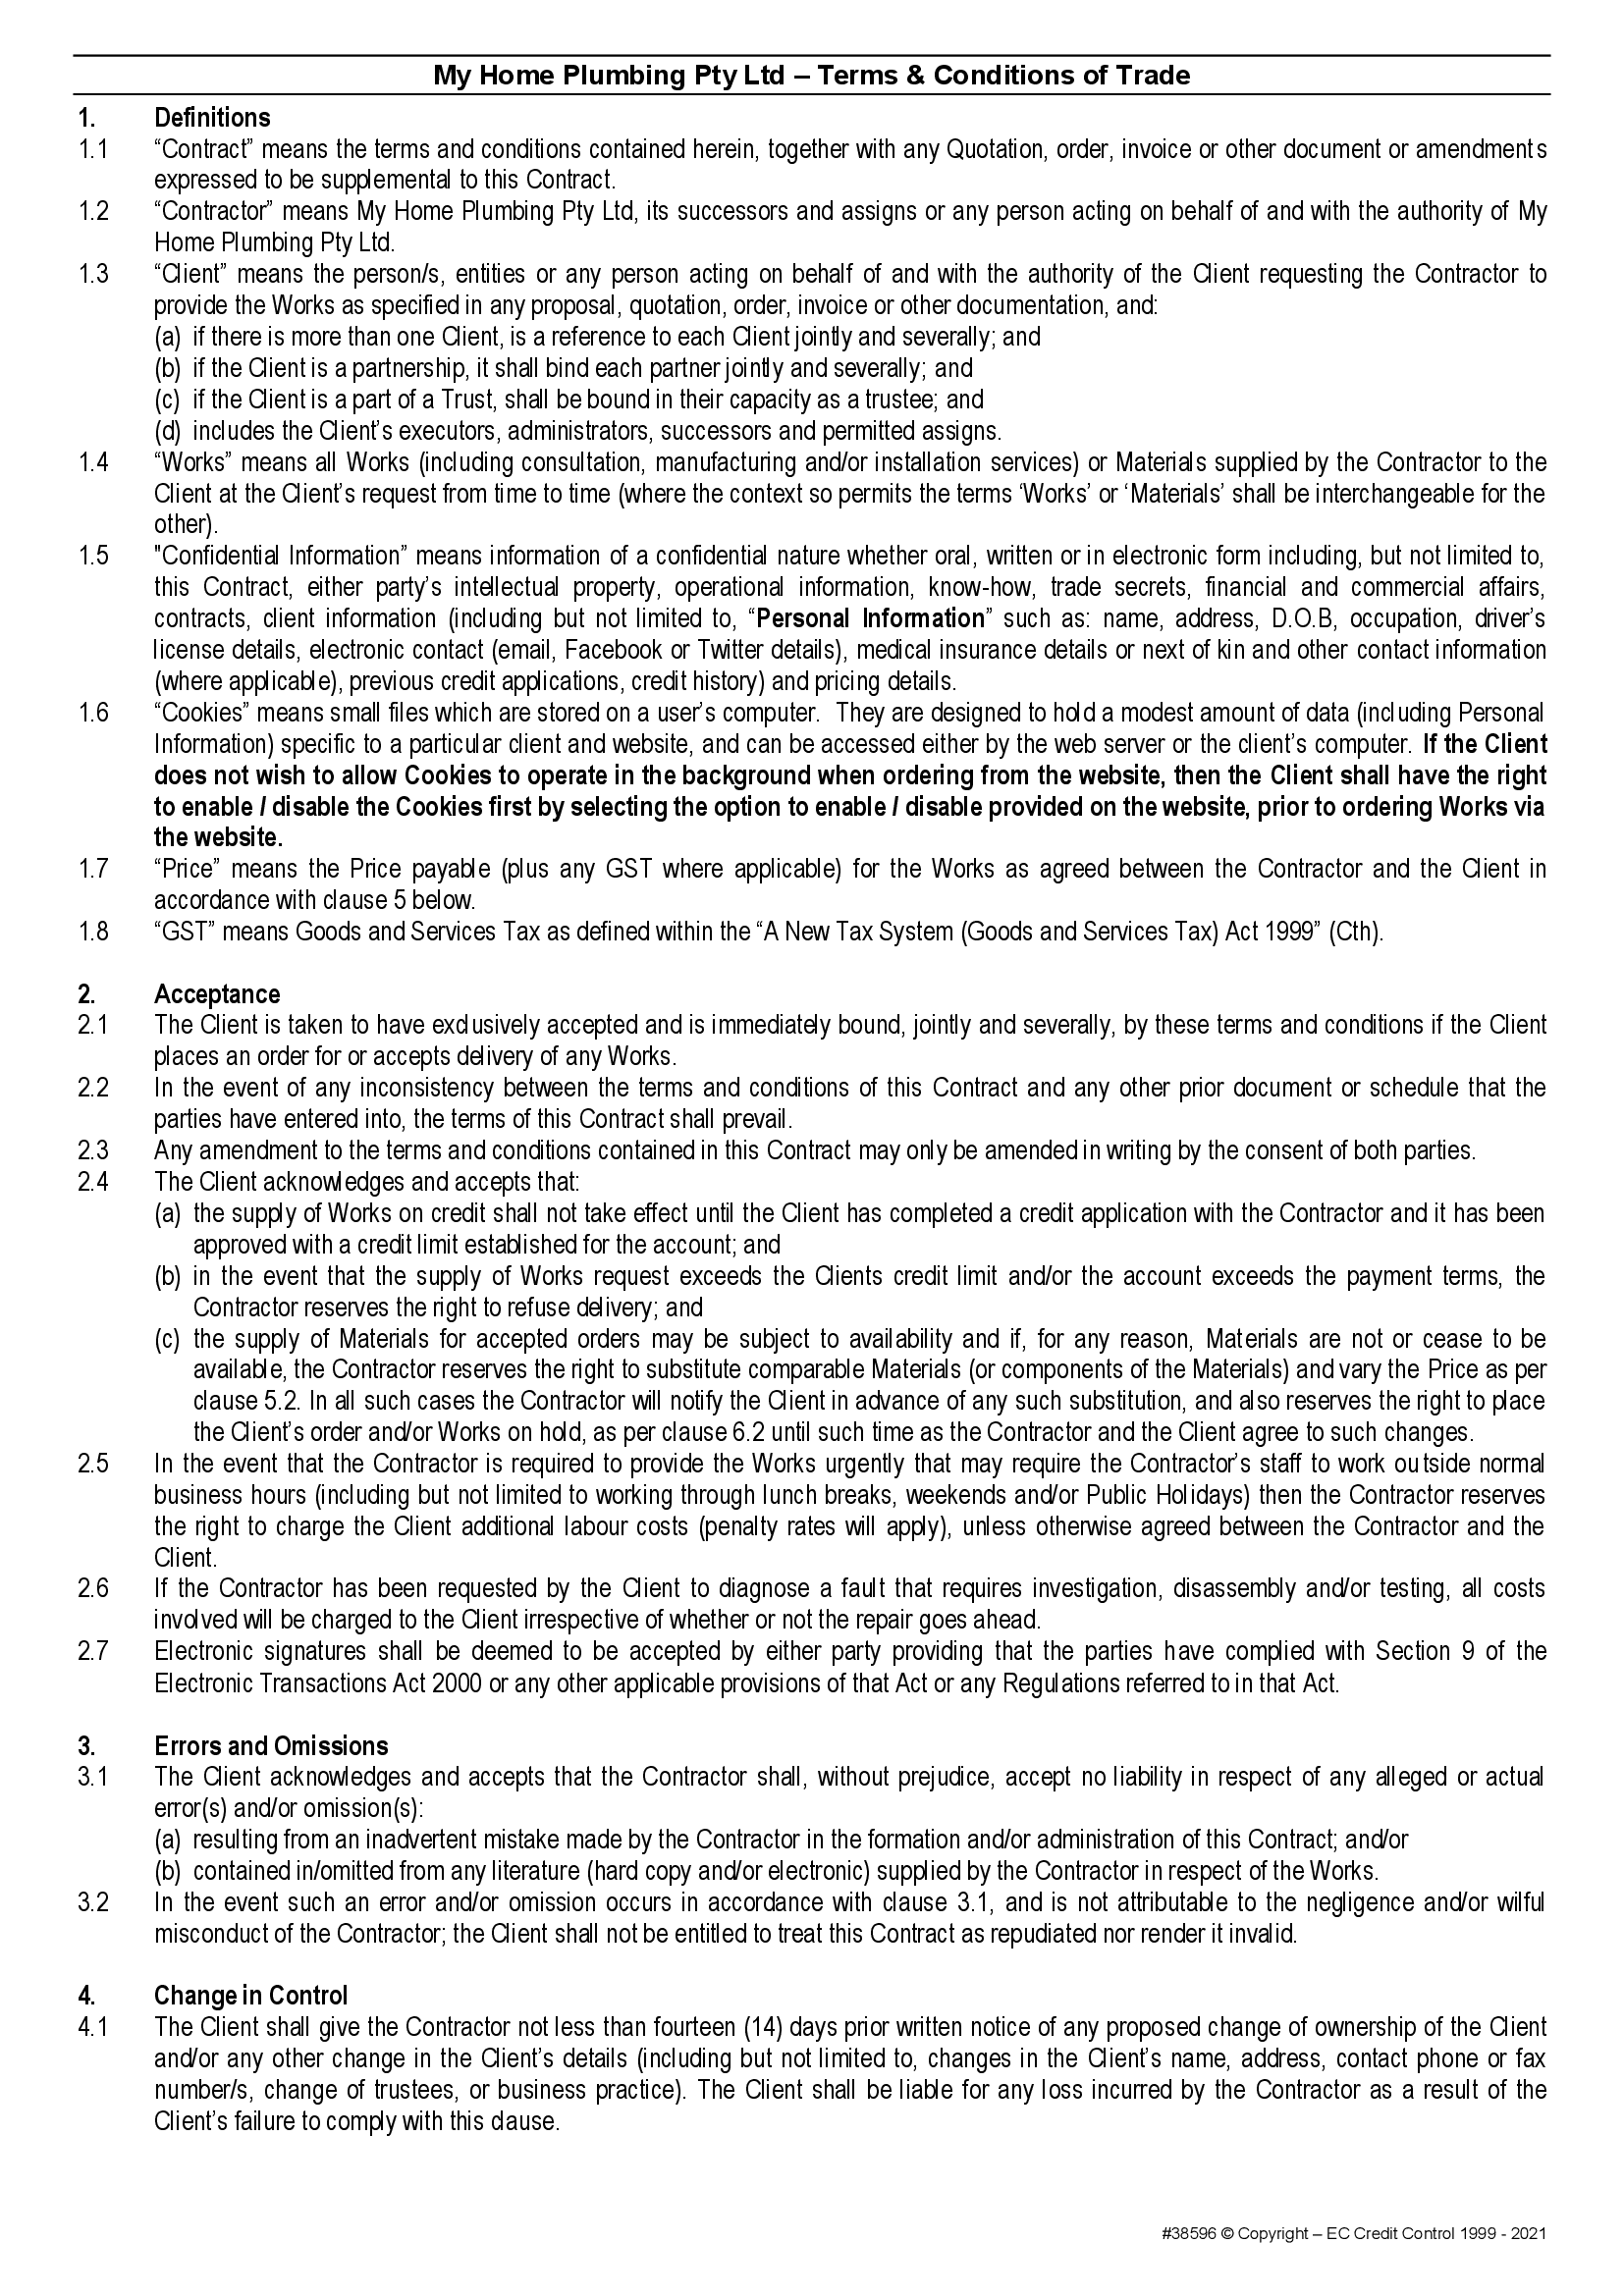 MHP terms and conditions page 1